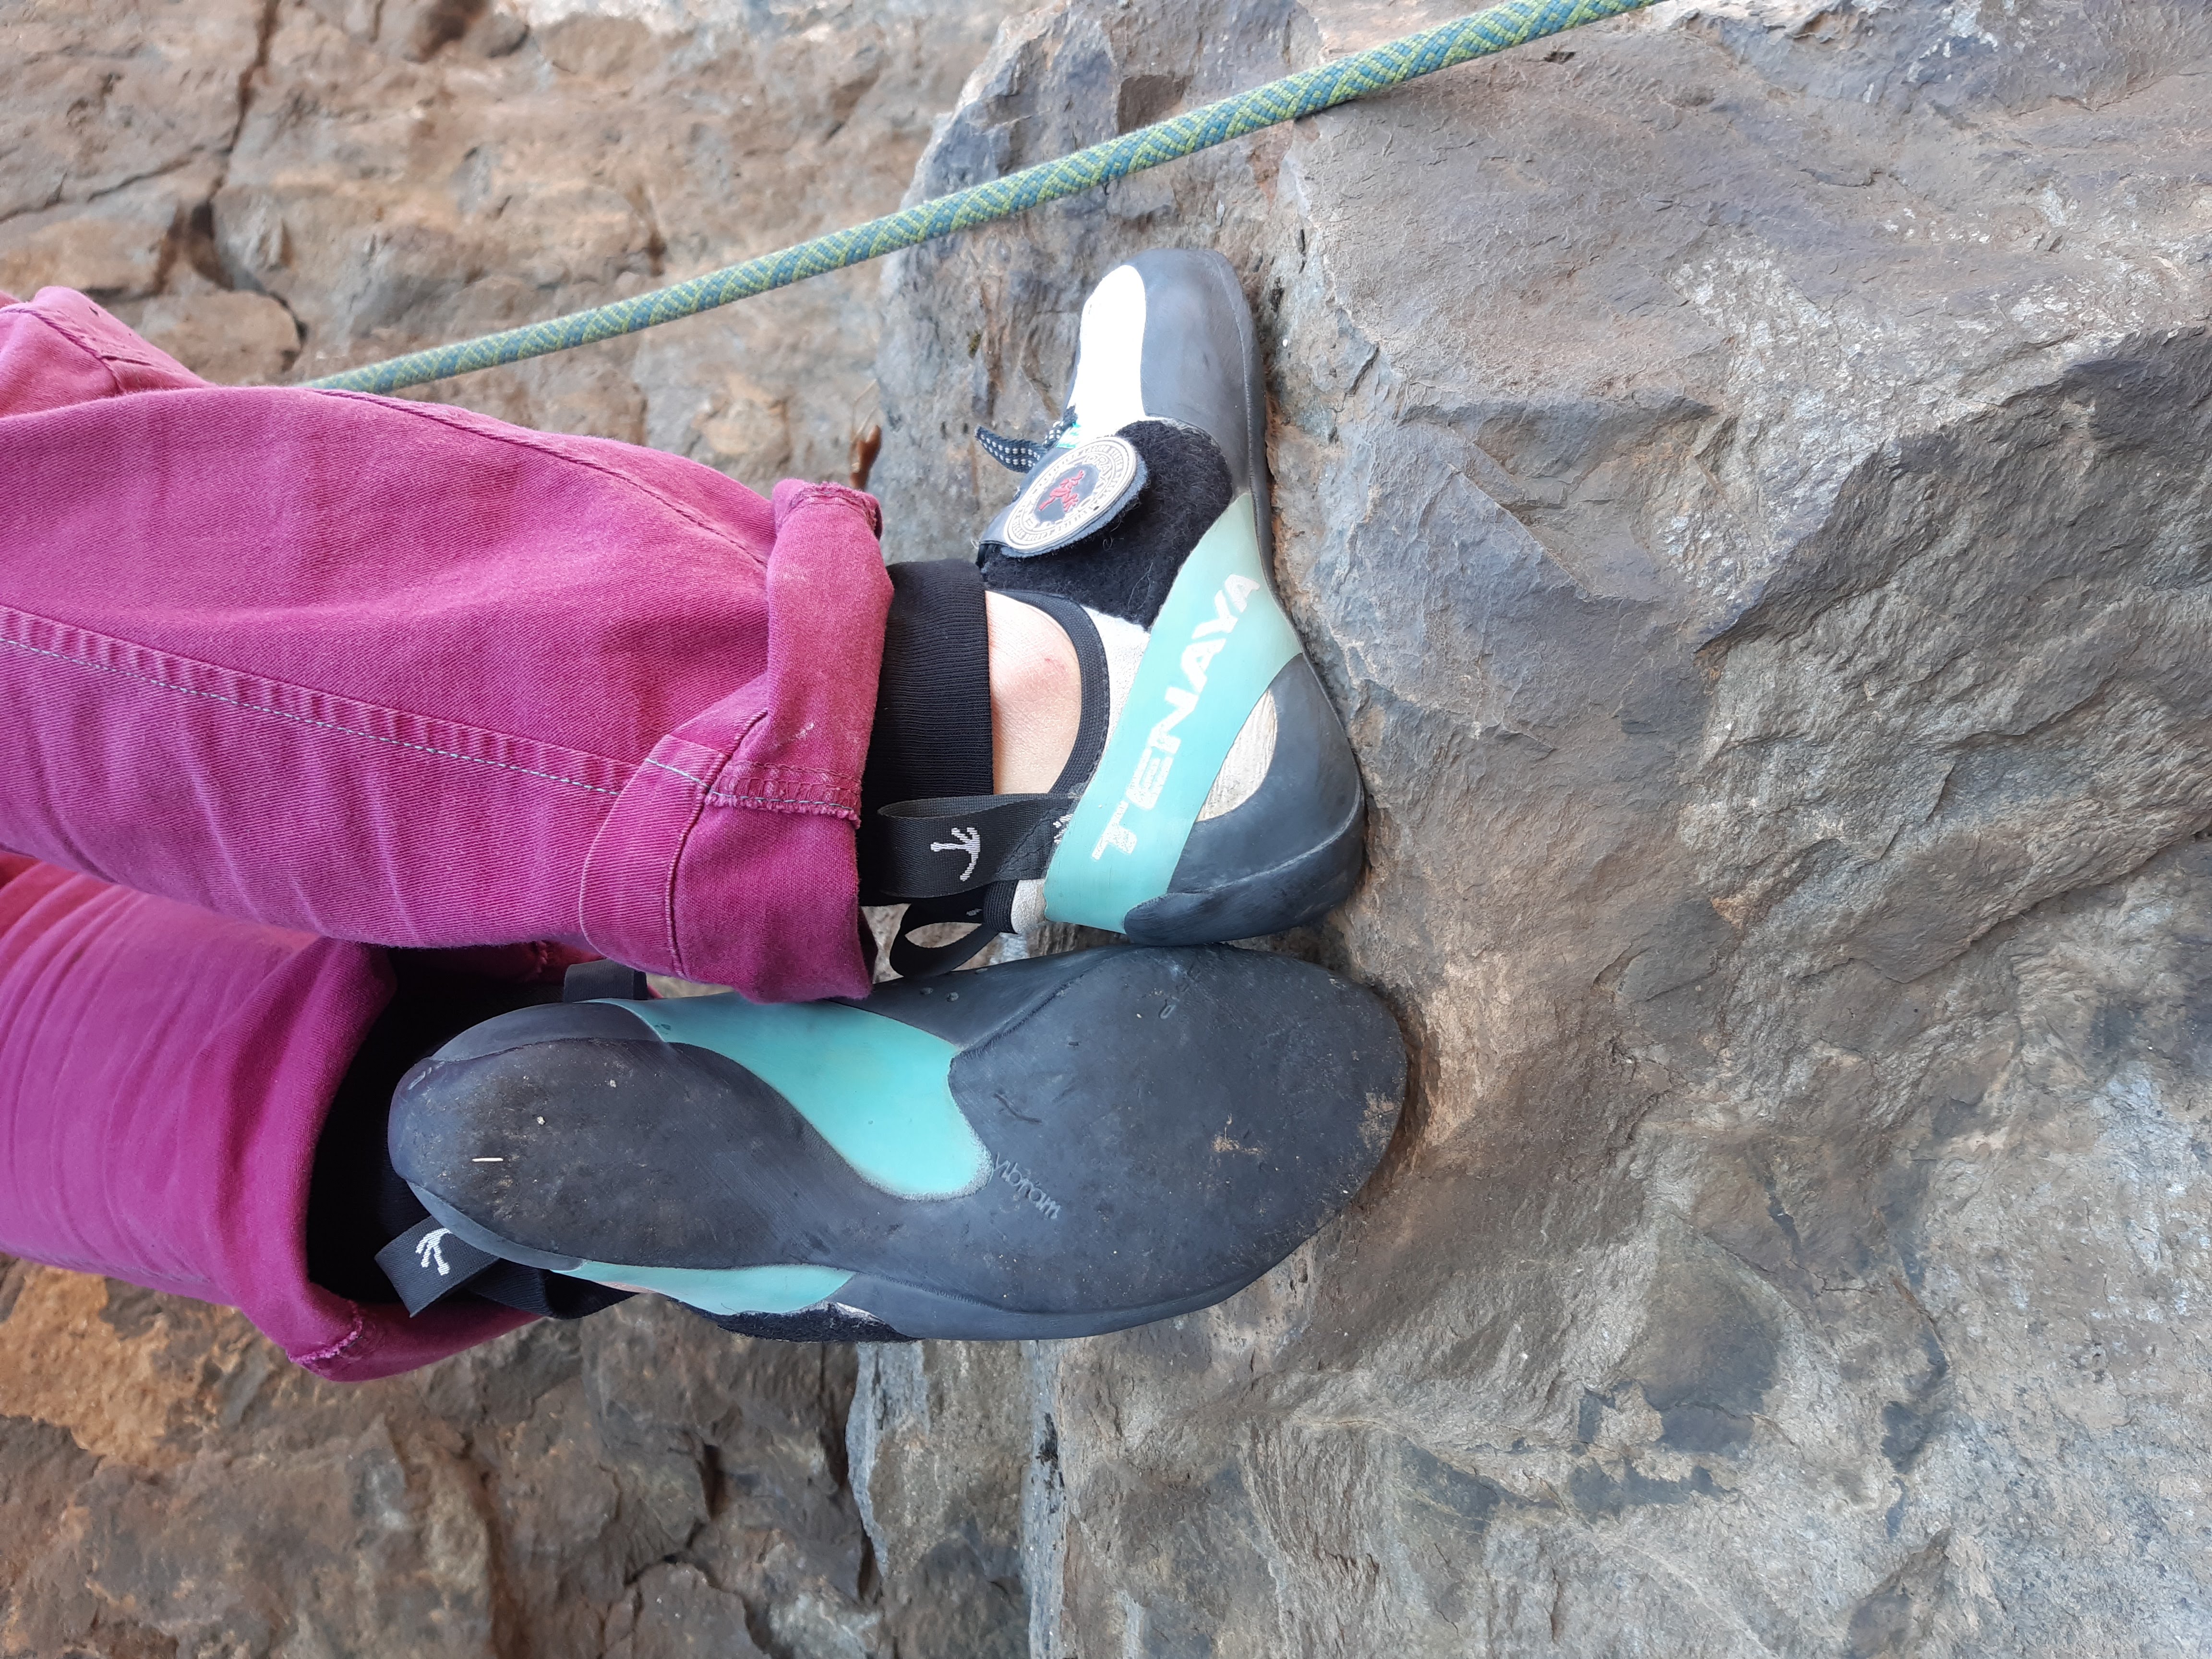 My Honest Scarpa Drago Review: Tried & Tested